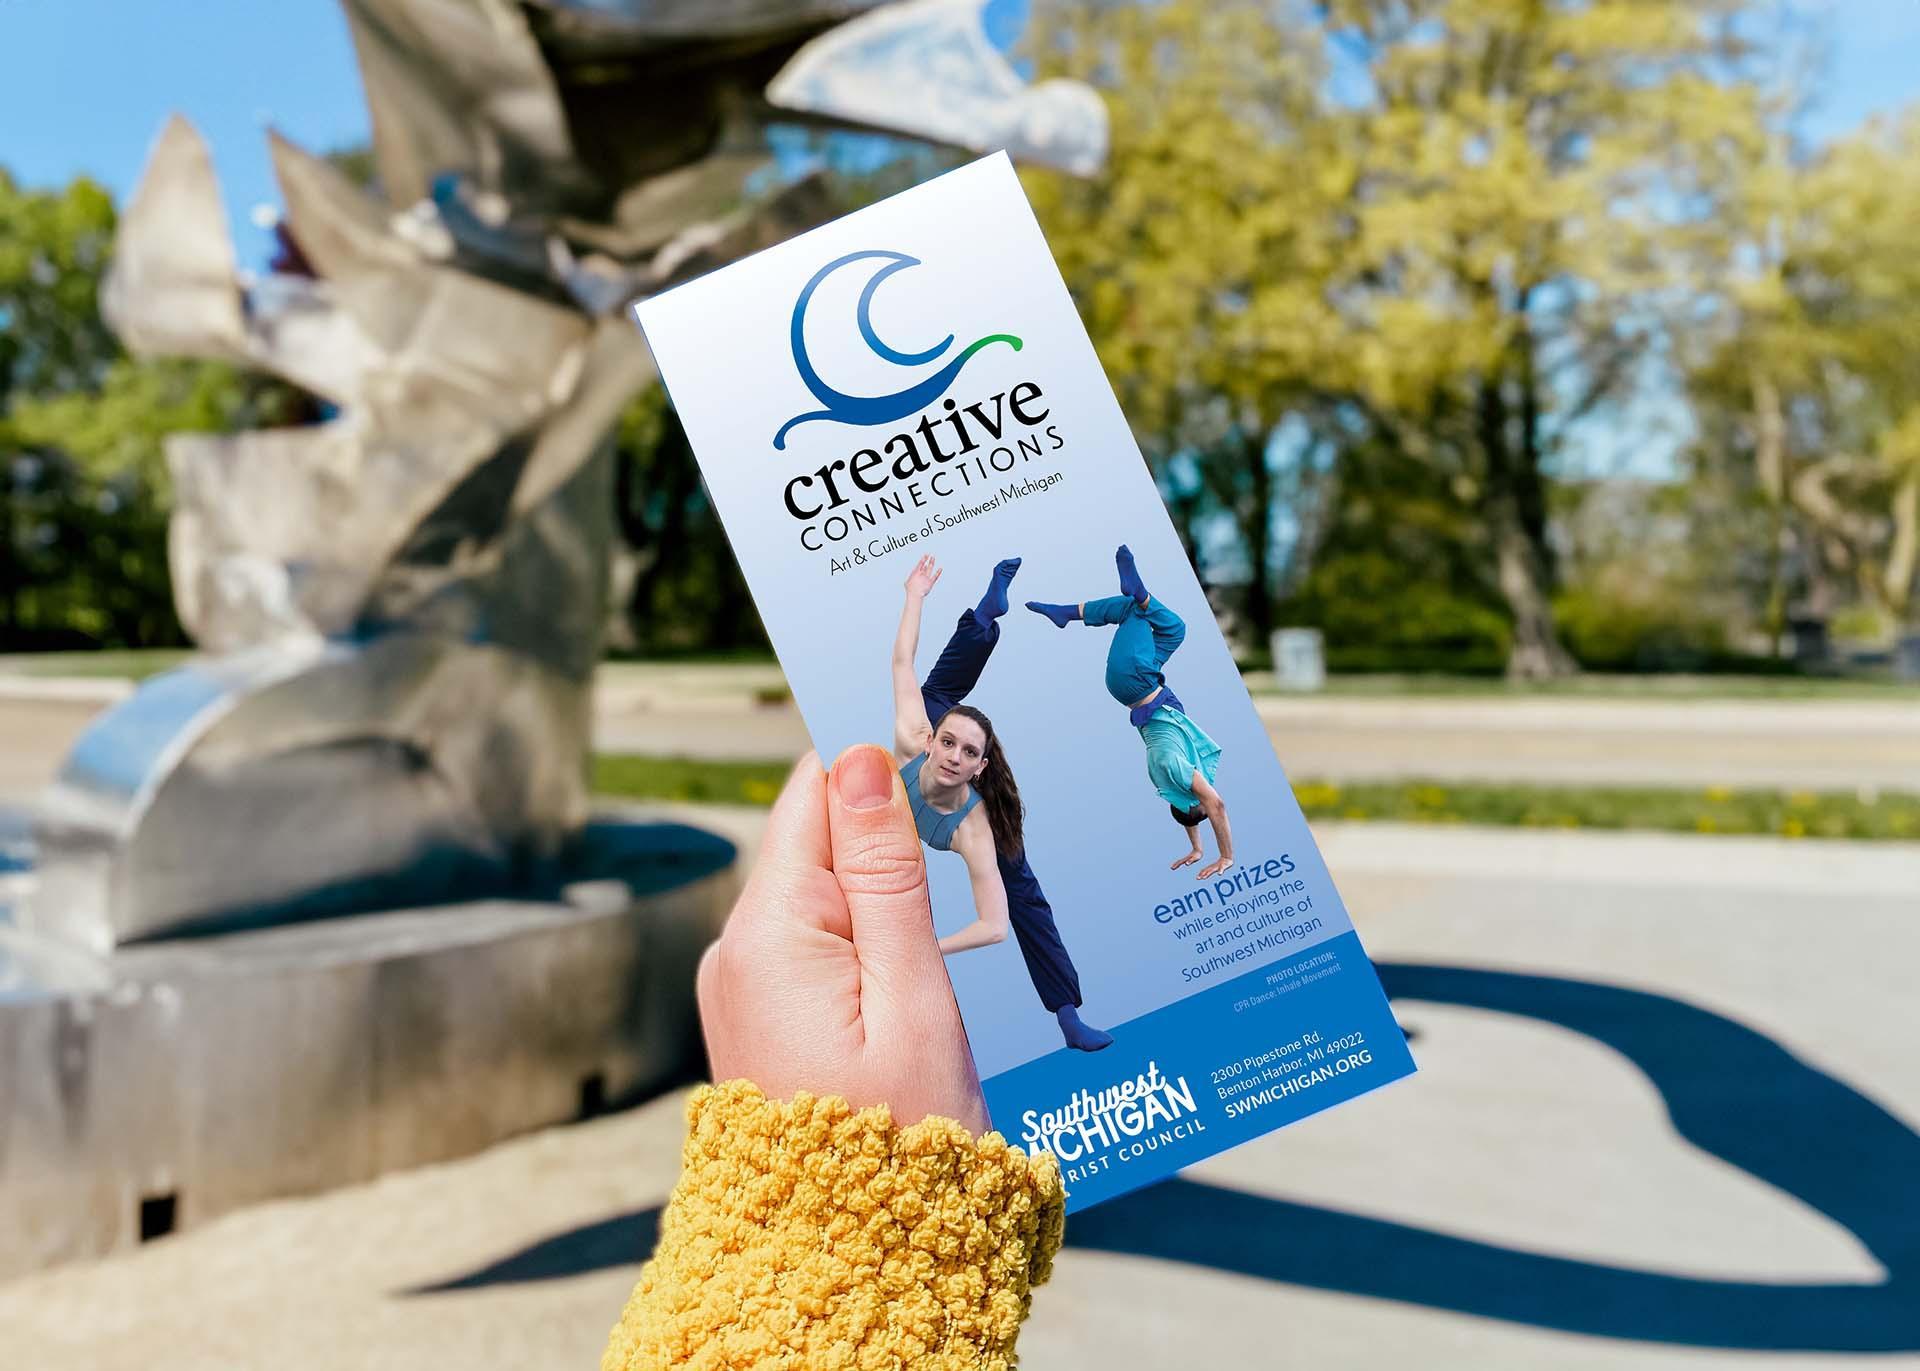 A person holding the Creative Connections brochure.